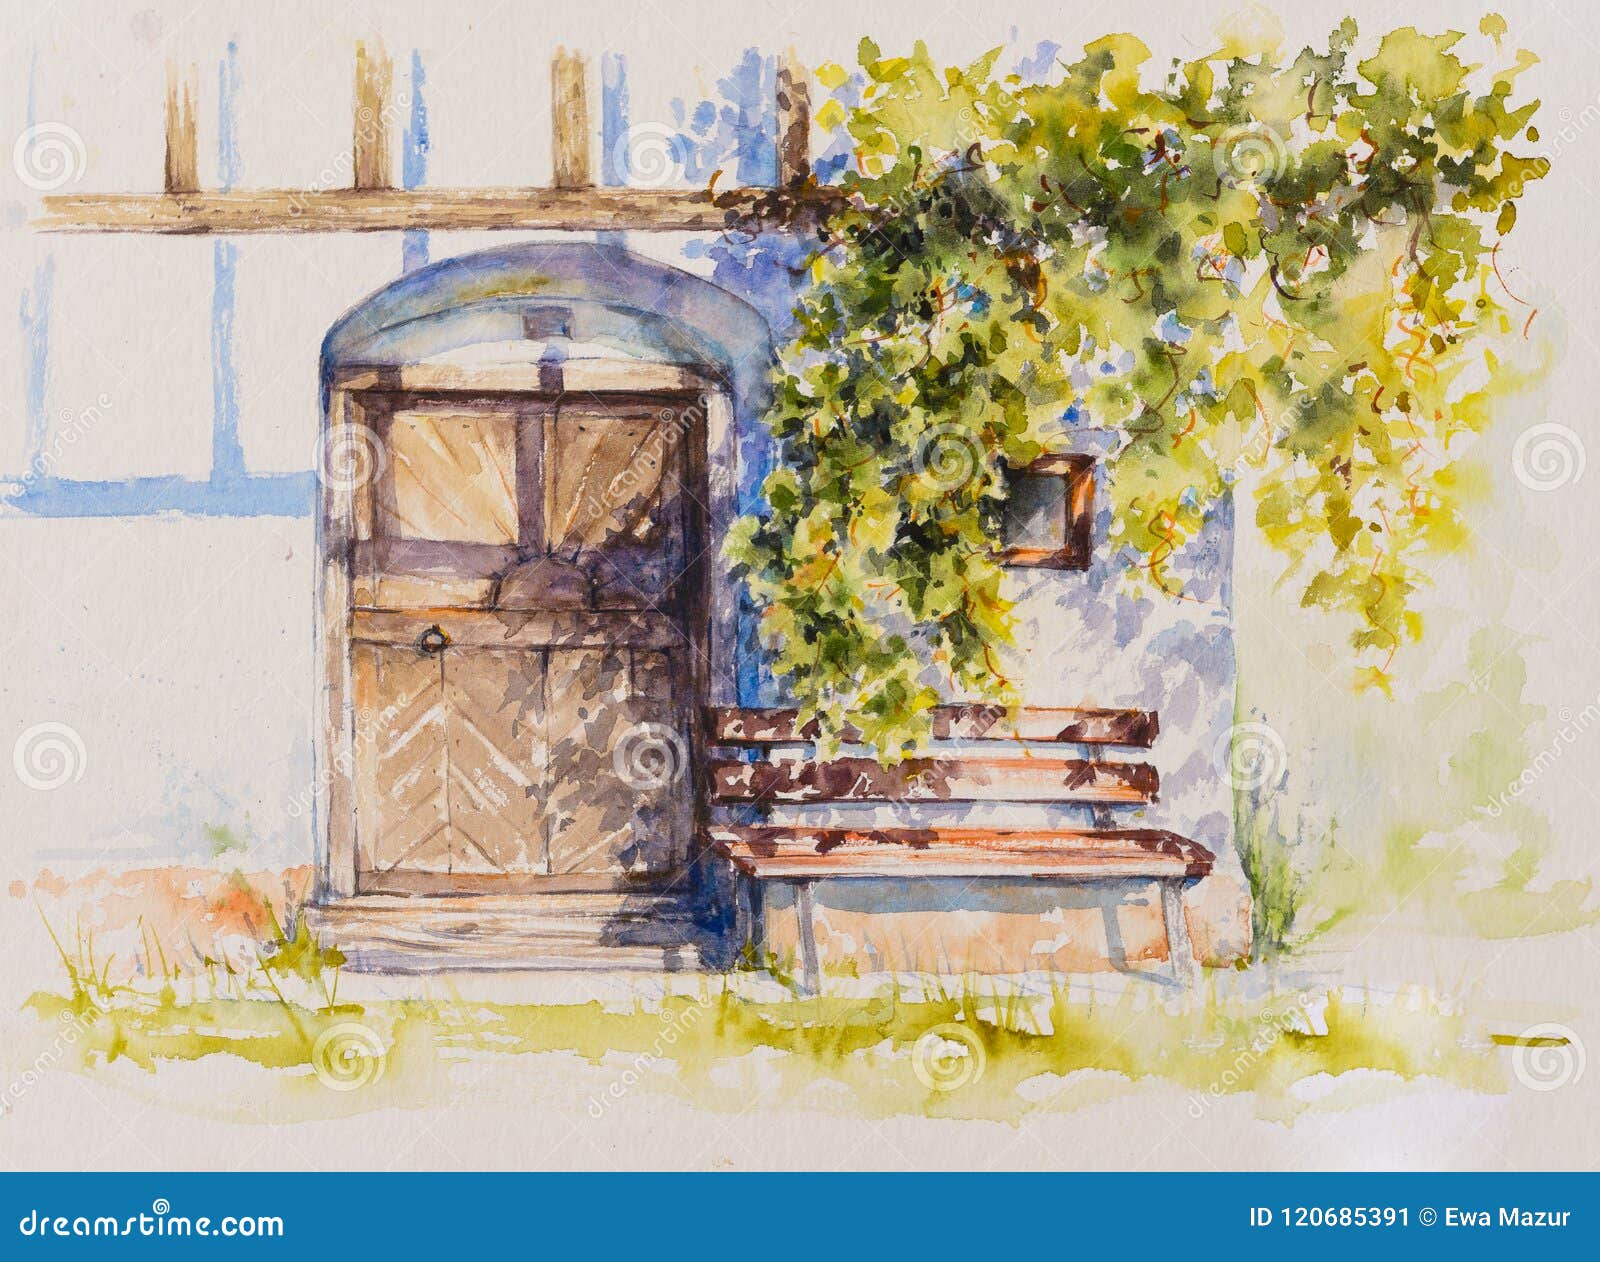 Wine Cellar Watercolors Painted Stock Illustration - Illustration Of Monument, Outdoors: 120685391